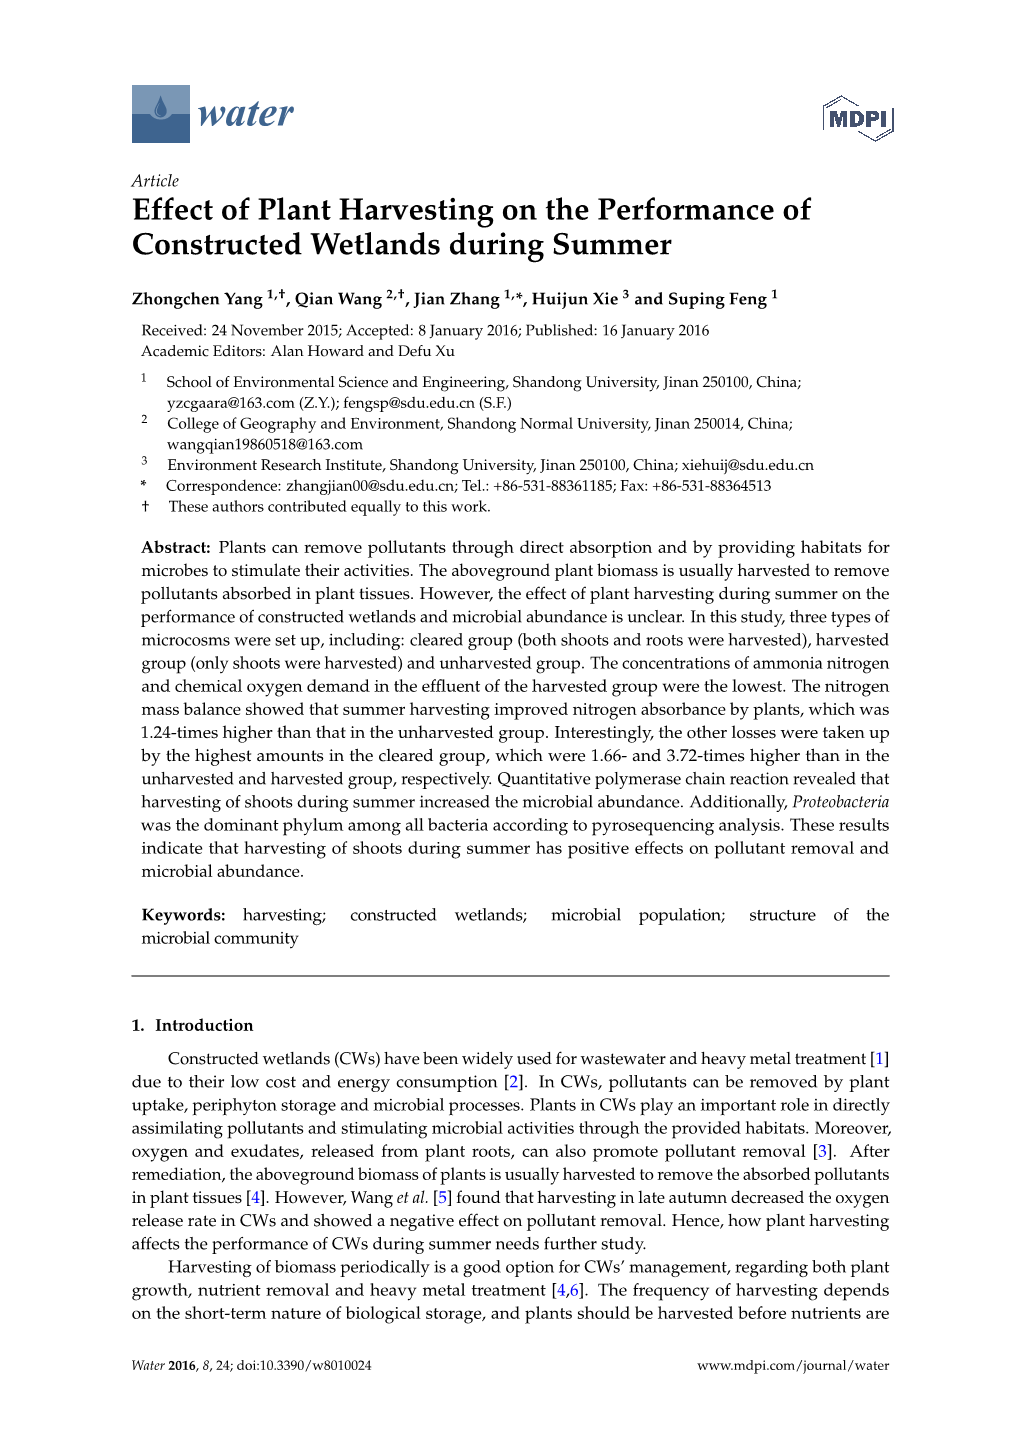 Effect of Plant Harvesting on the Performance of Constructed Wetlands During Summer